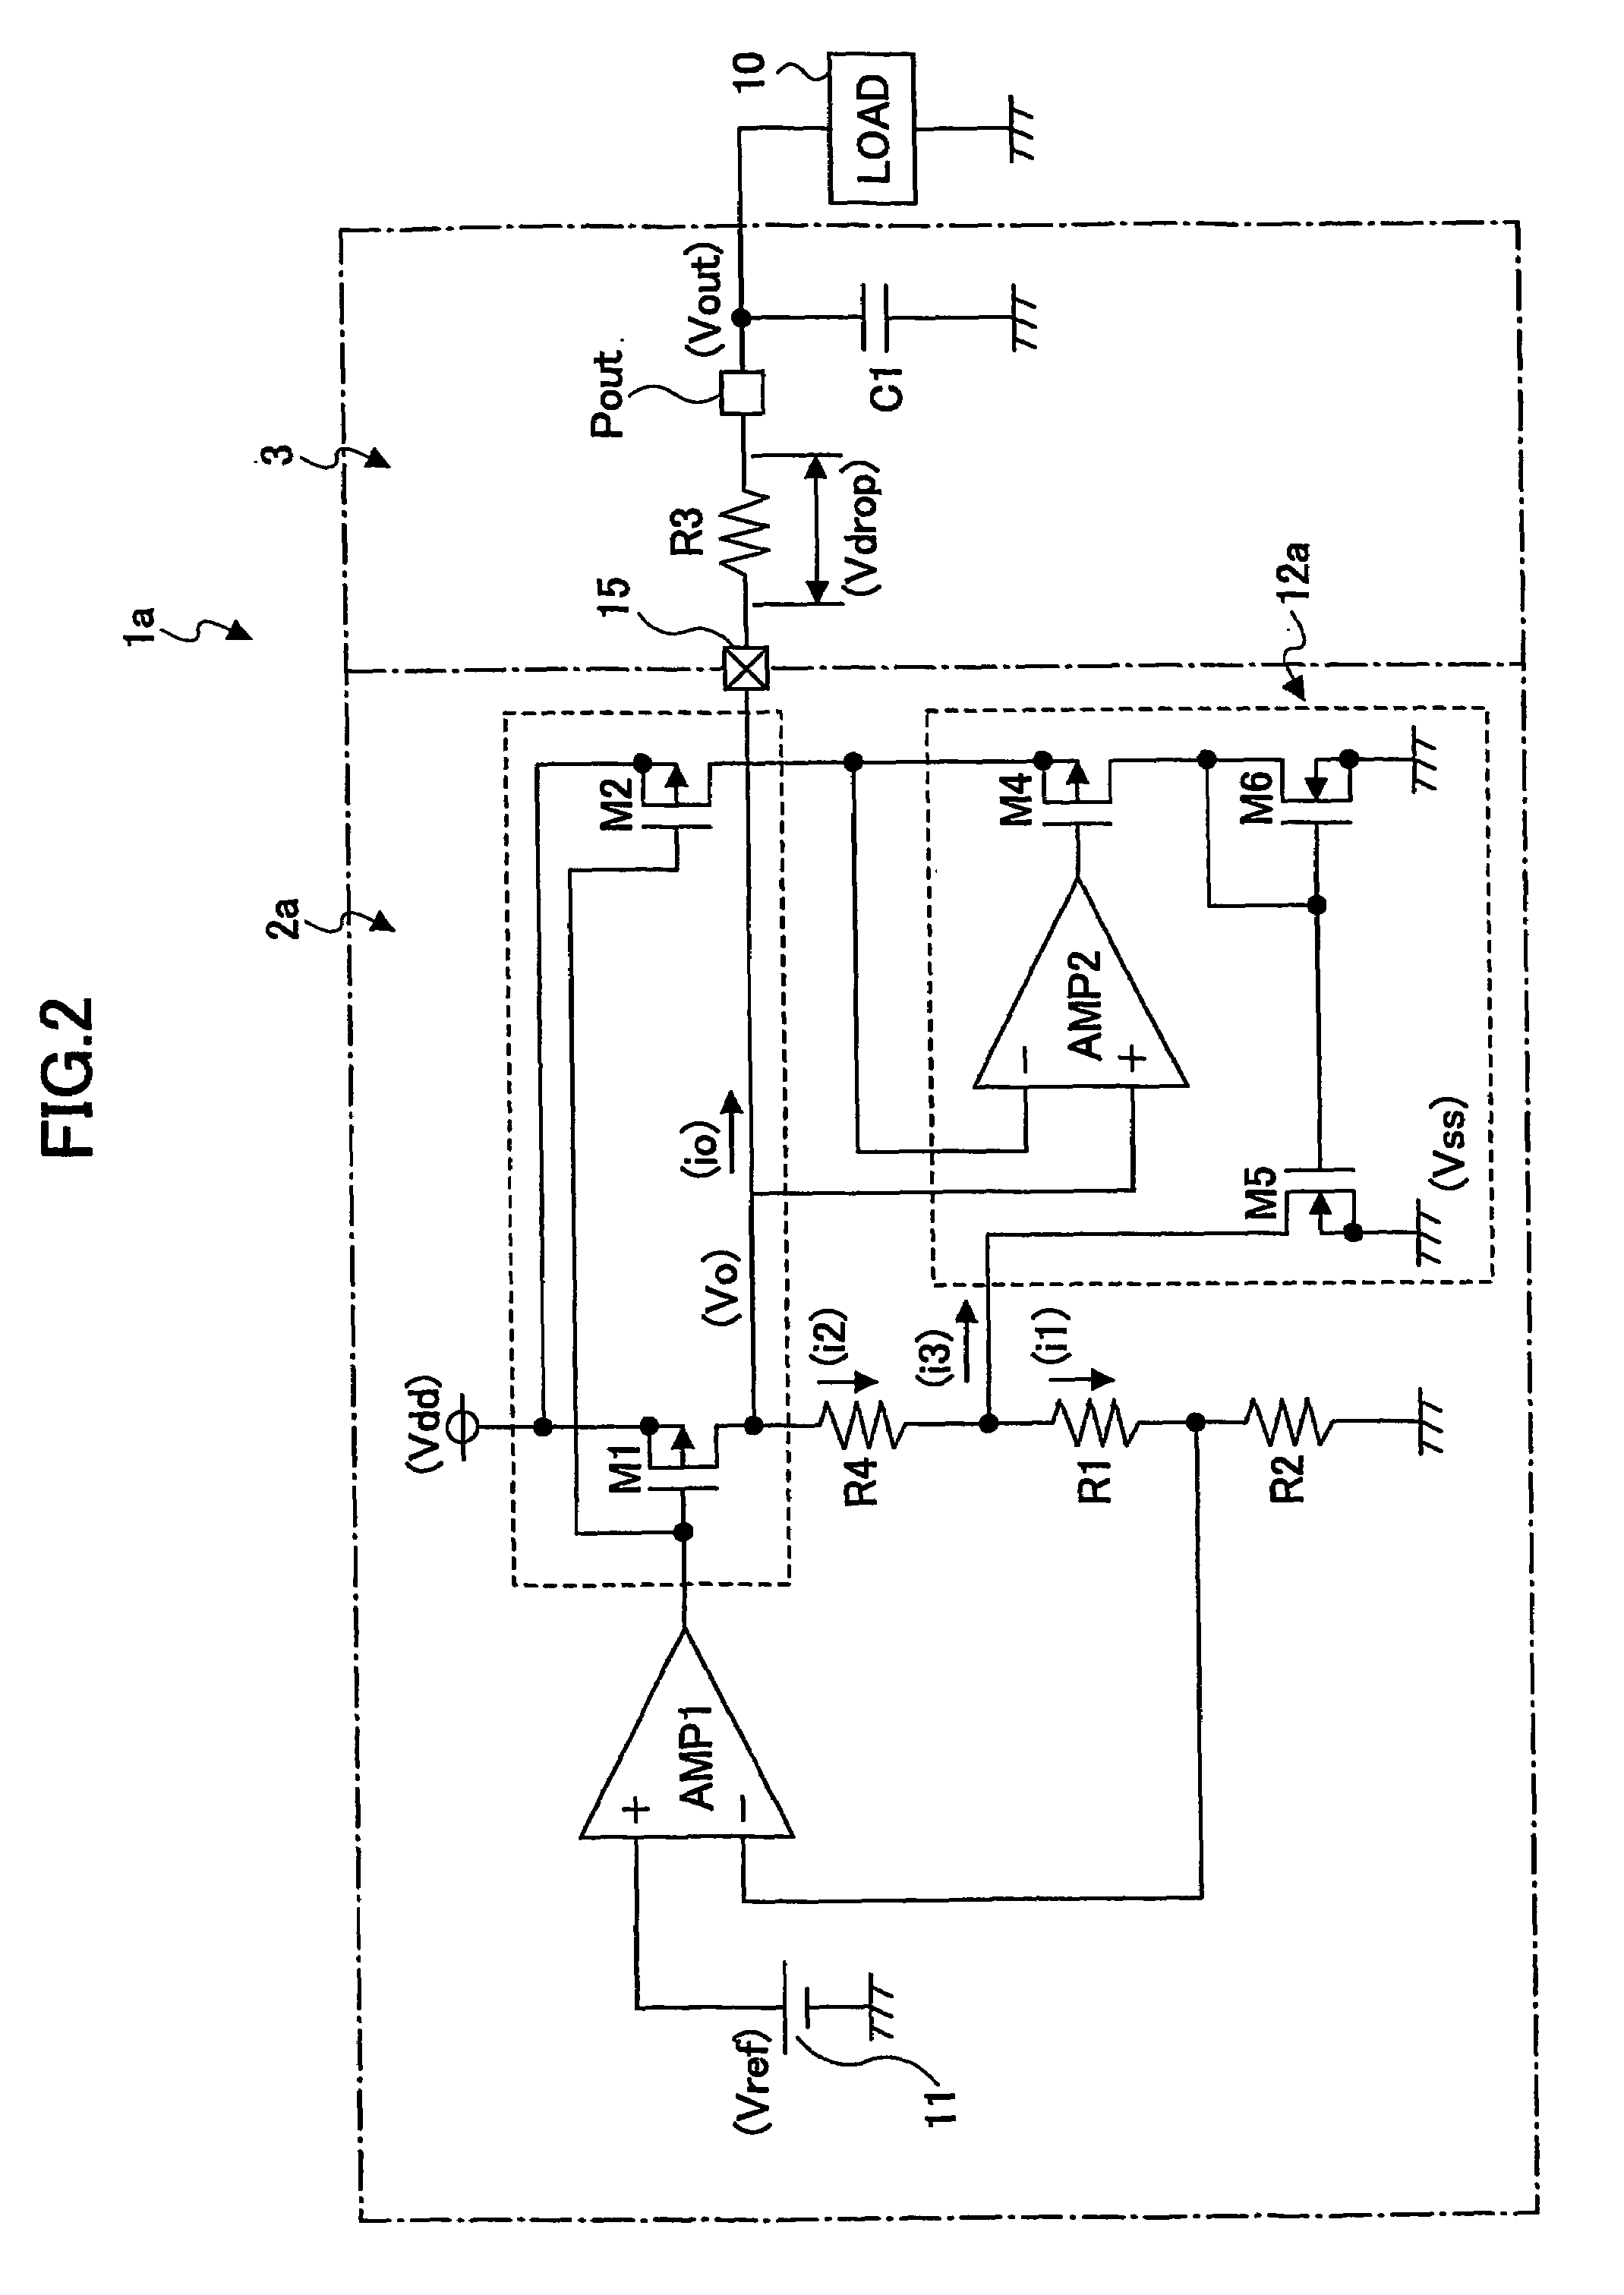 Constant voltage circuit with phase compensation